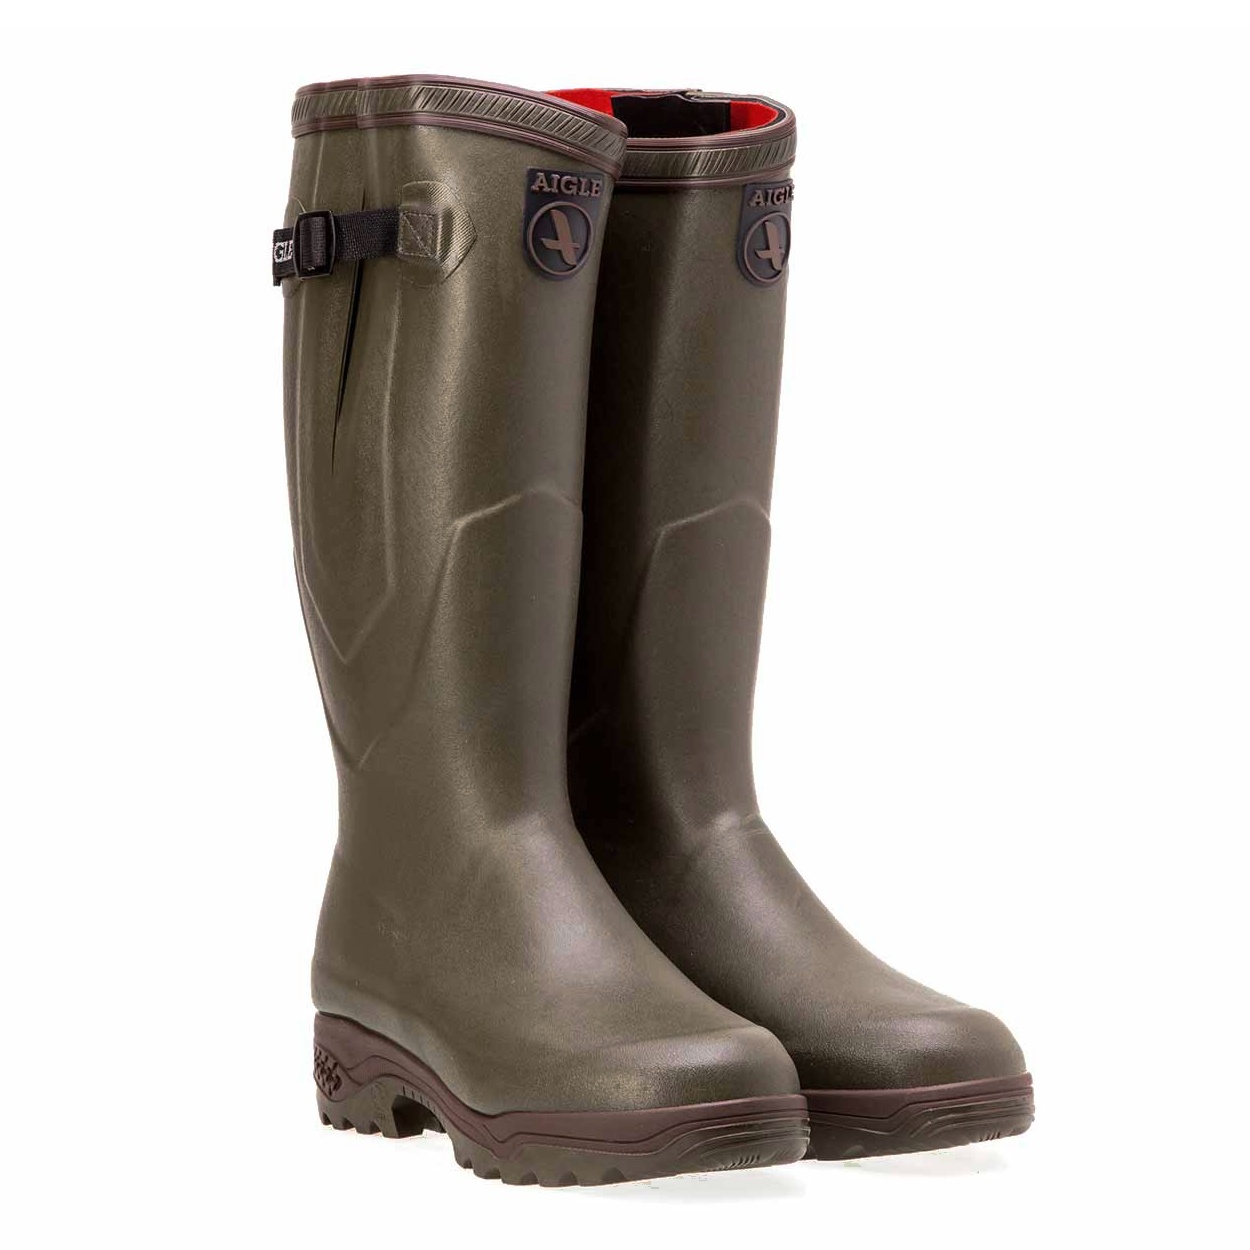 Aigle Wellies Parcours 2 ISO - Latest edition Insulated Wellington ...